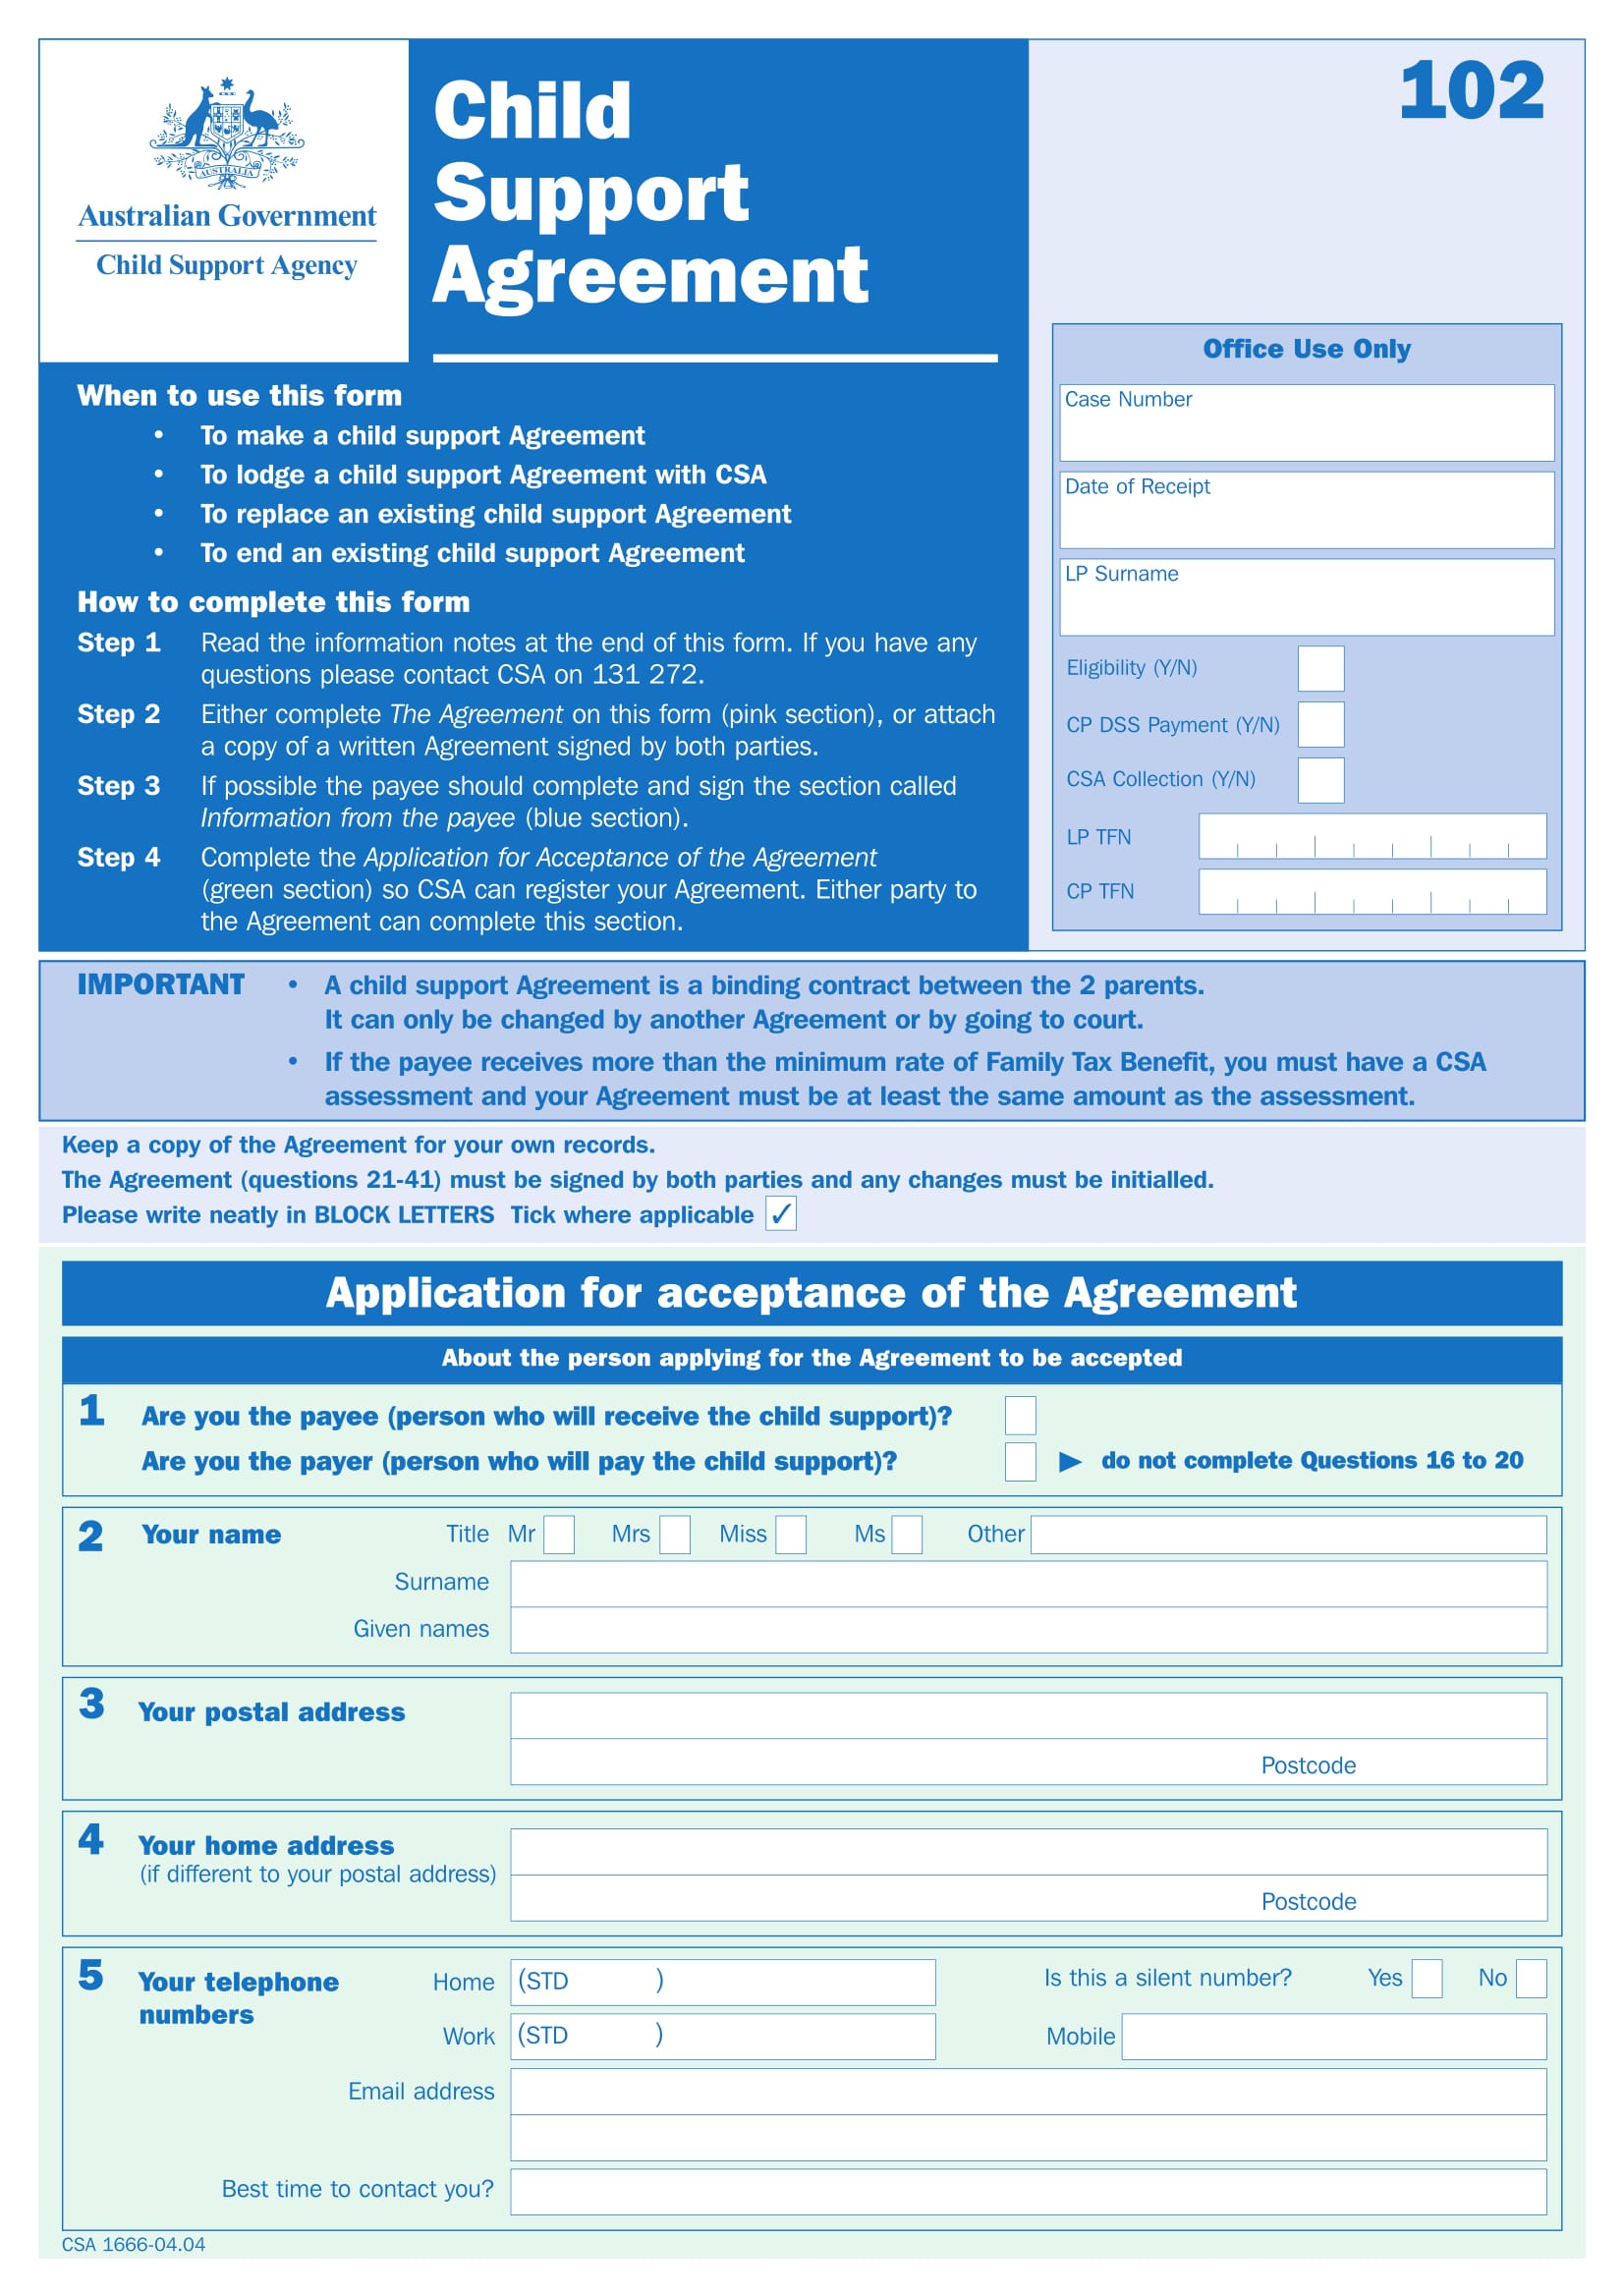 child support agreement form 1